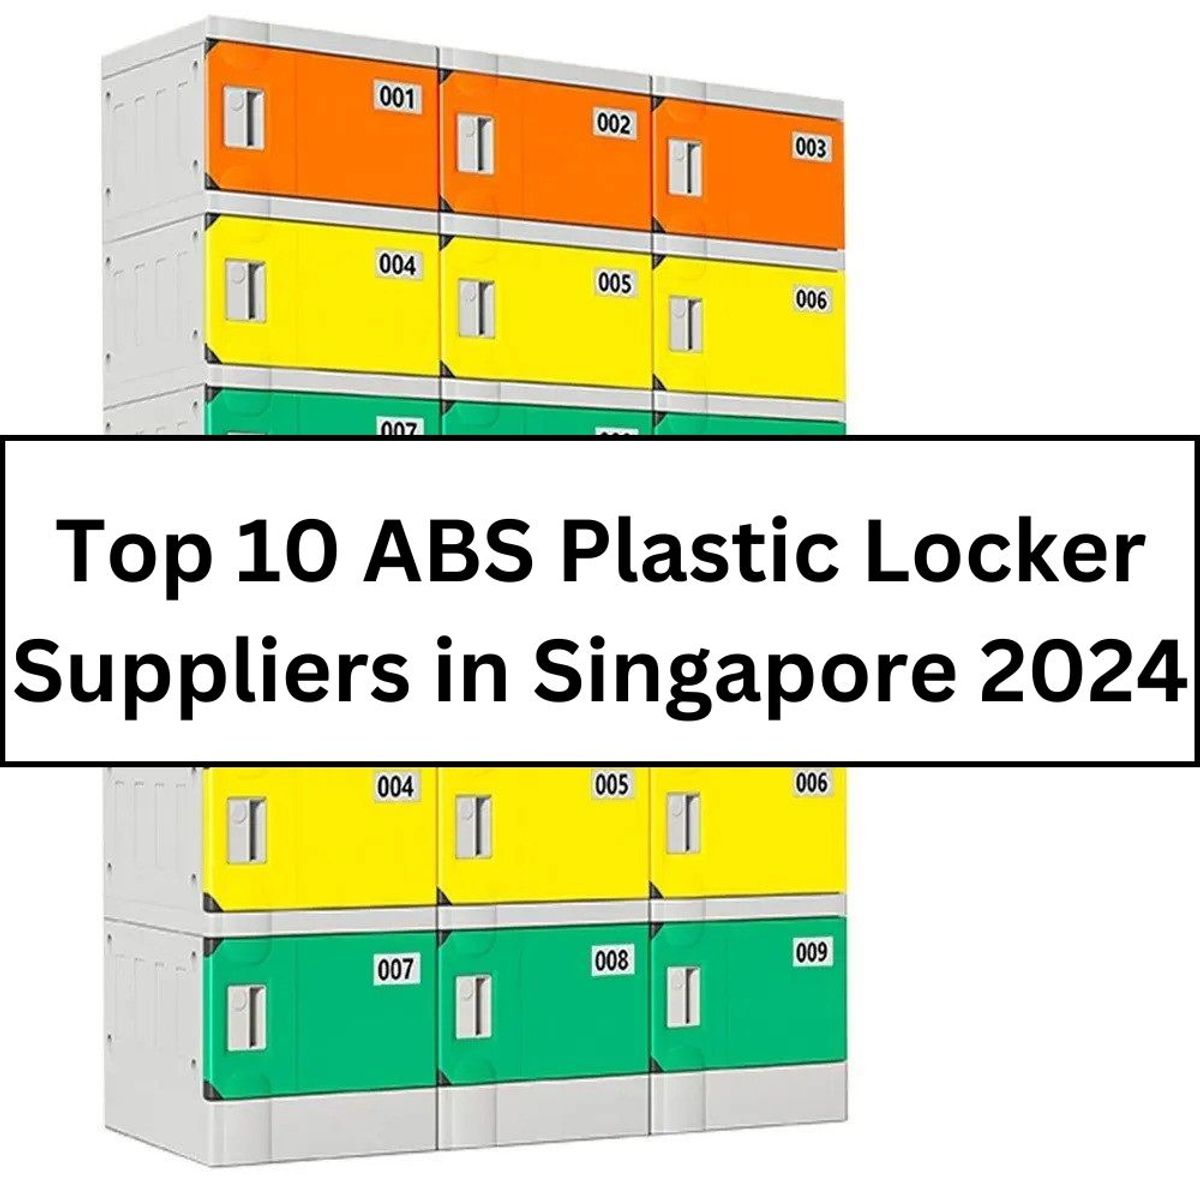 Top 10 ABS Plastic Locker Suppliers in Singapore 2024